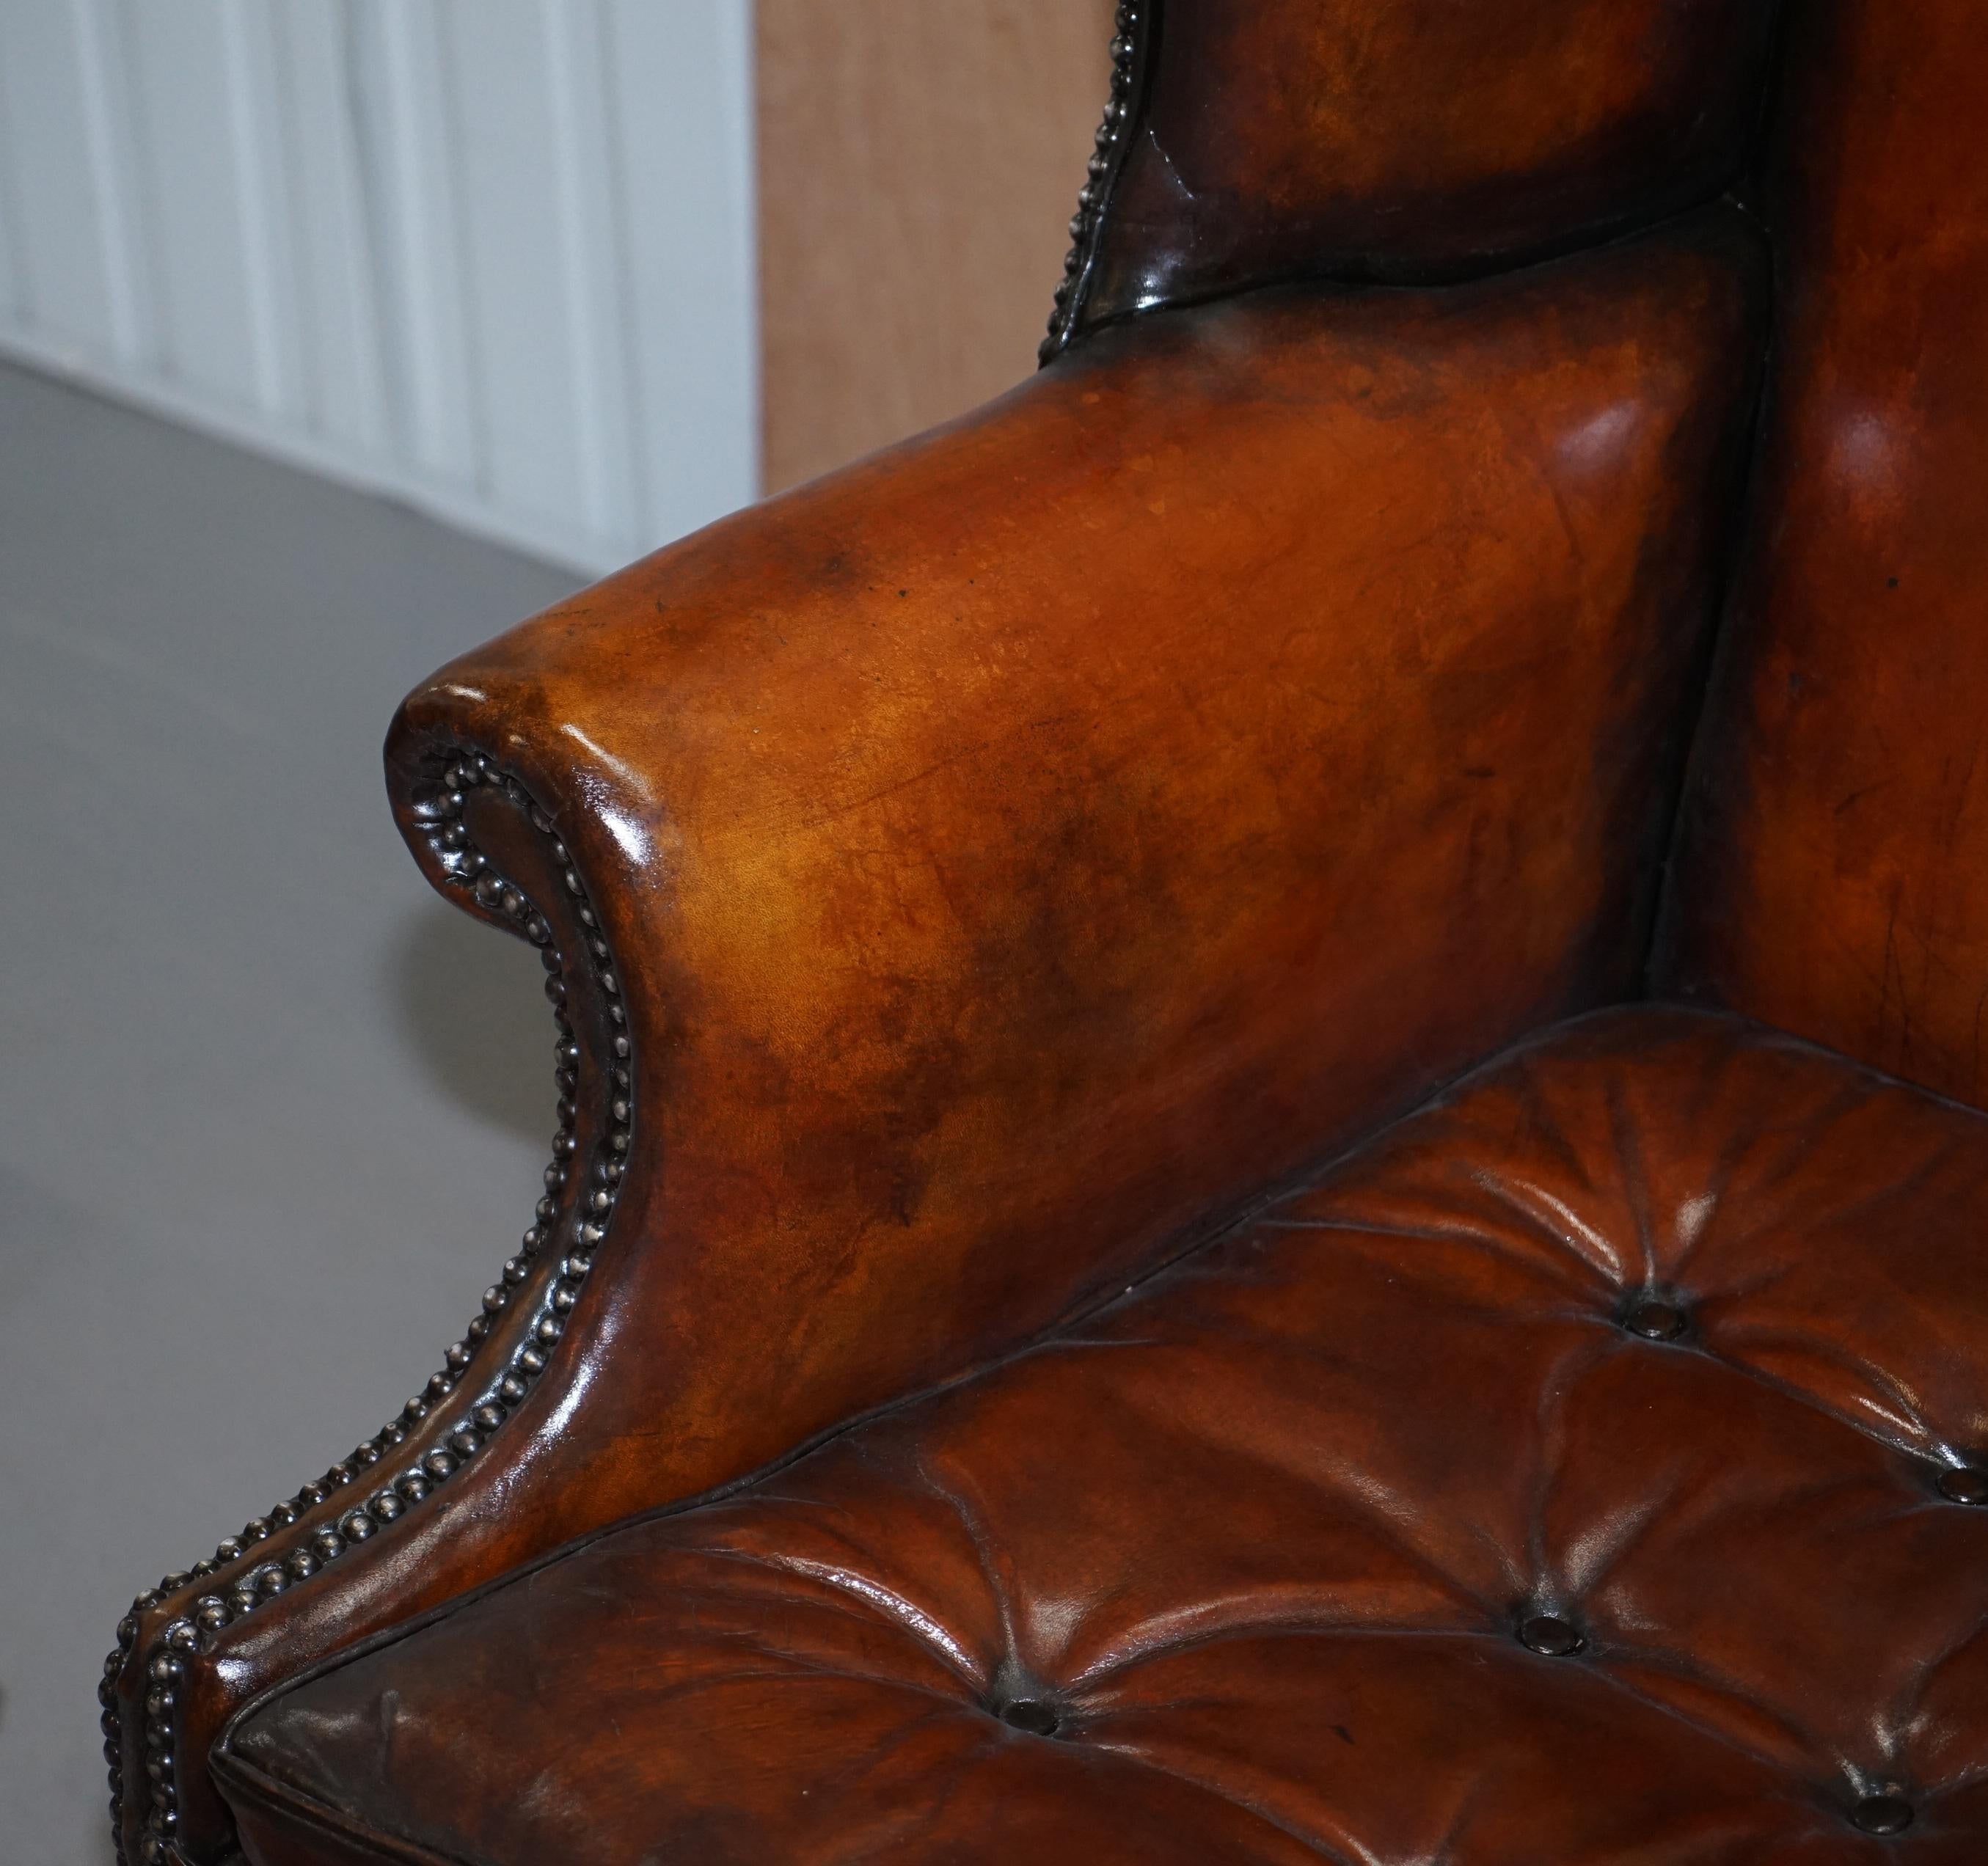 English Restored Victorian Brown Leather Chesterfield Chippendale Wingback Armchair